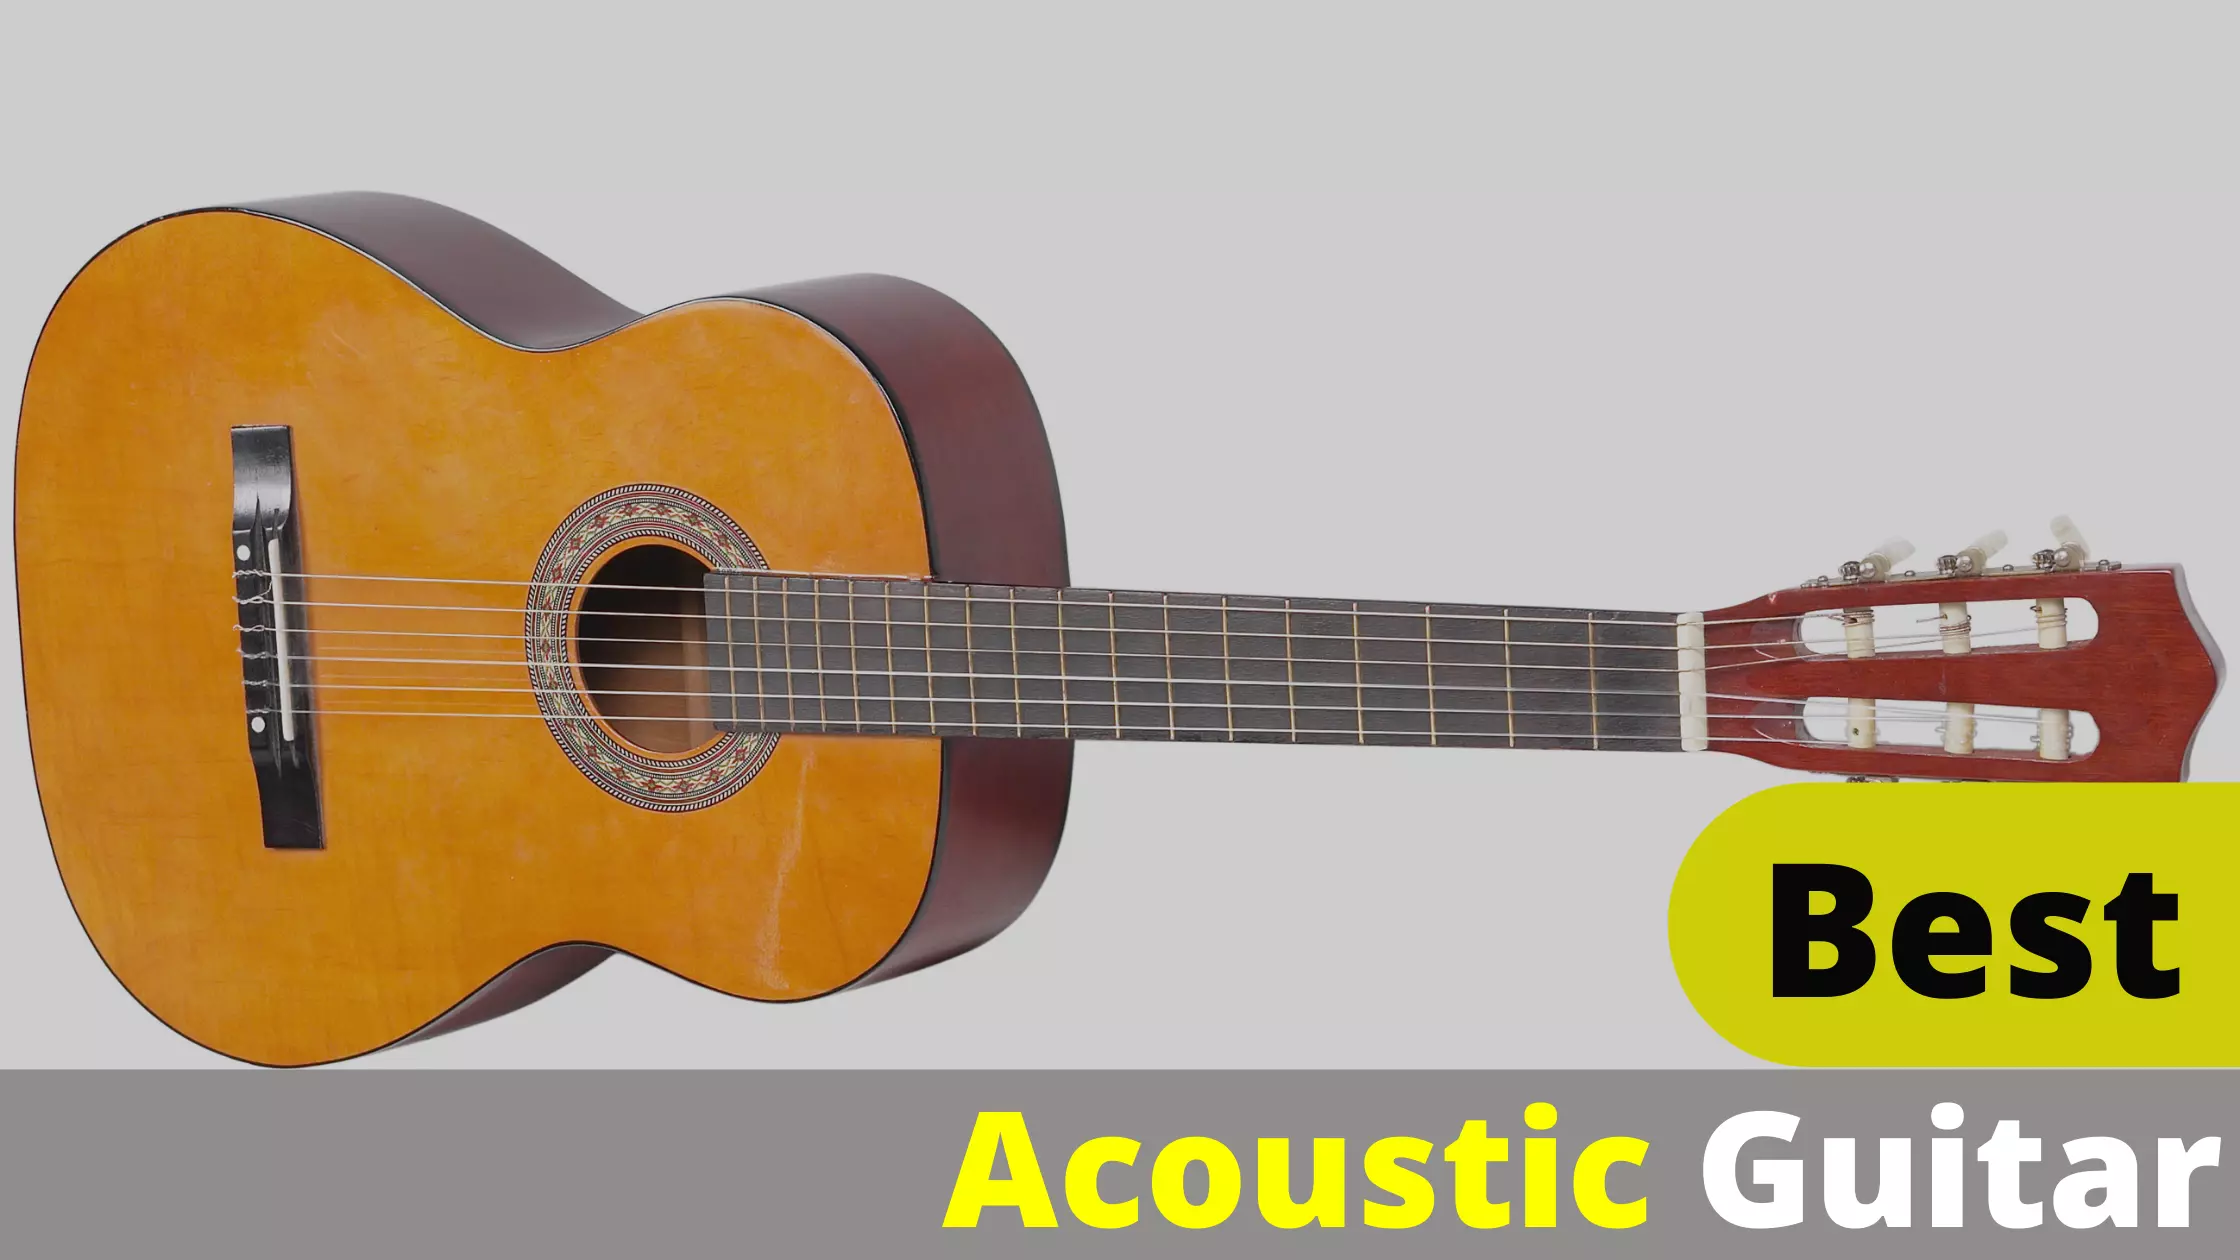 Top 10 Best Acoustic Guitar Reviews and Buying Guide 2022